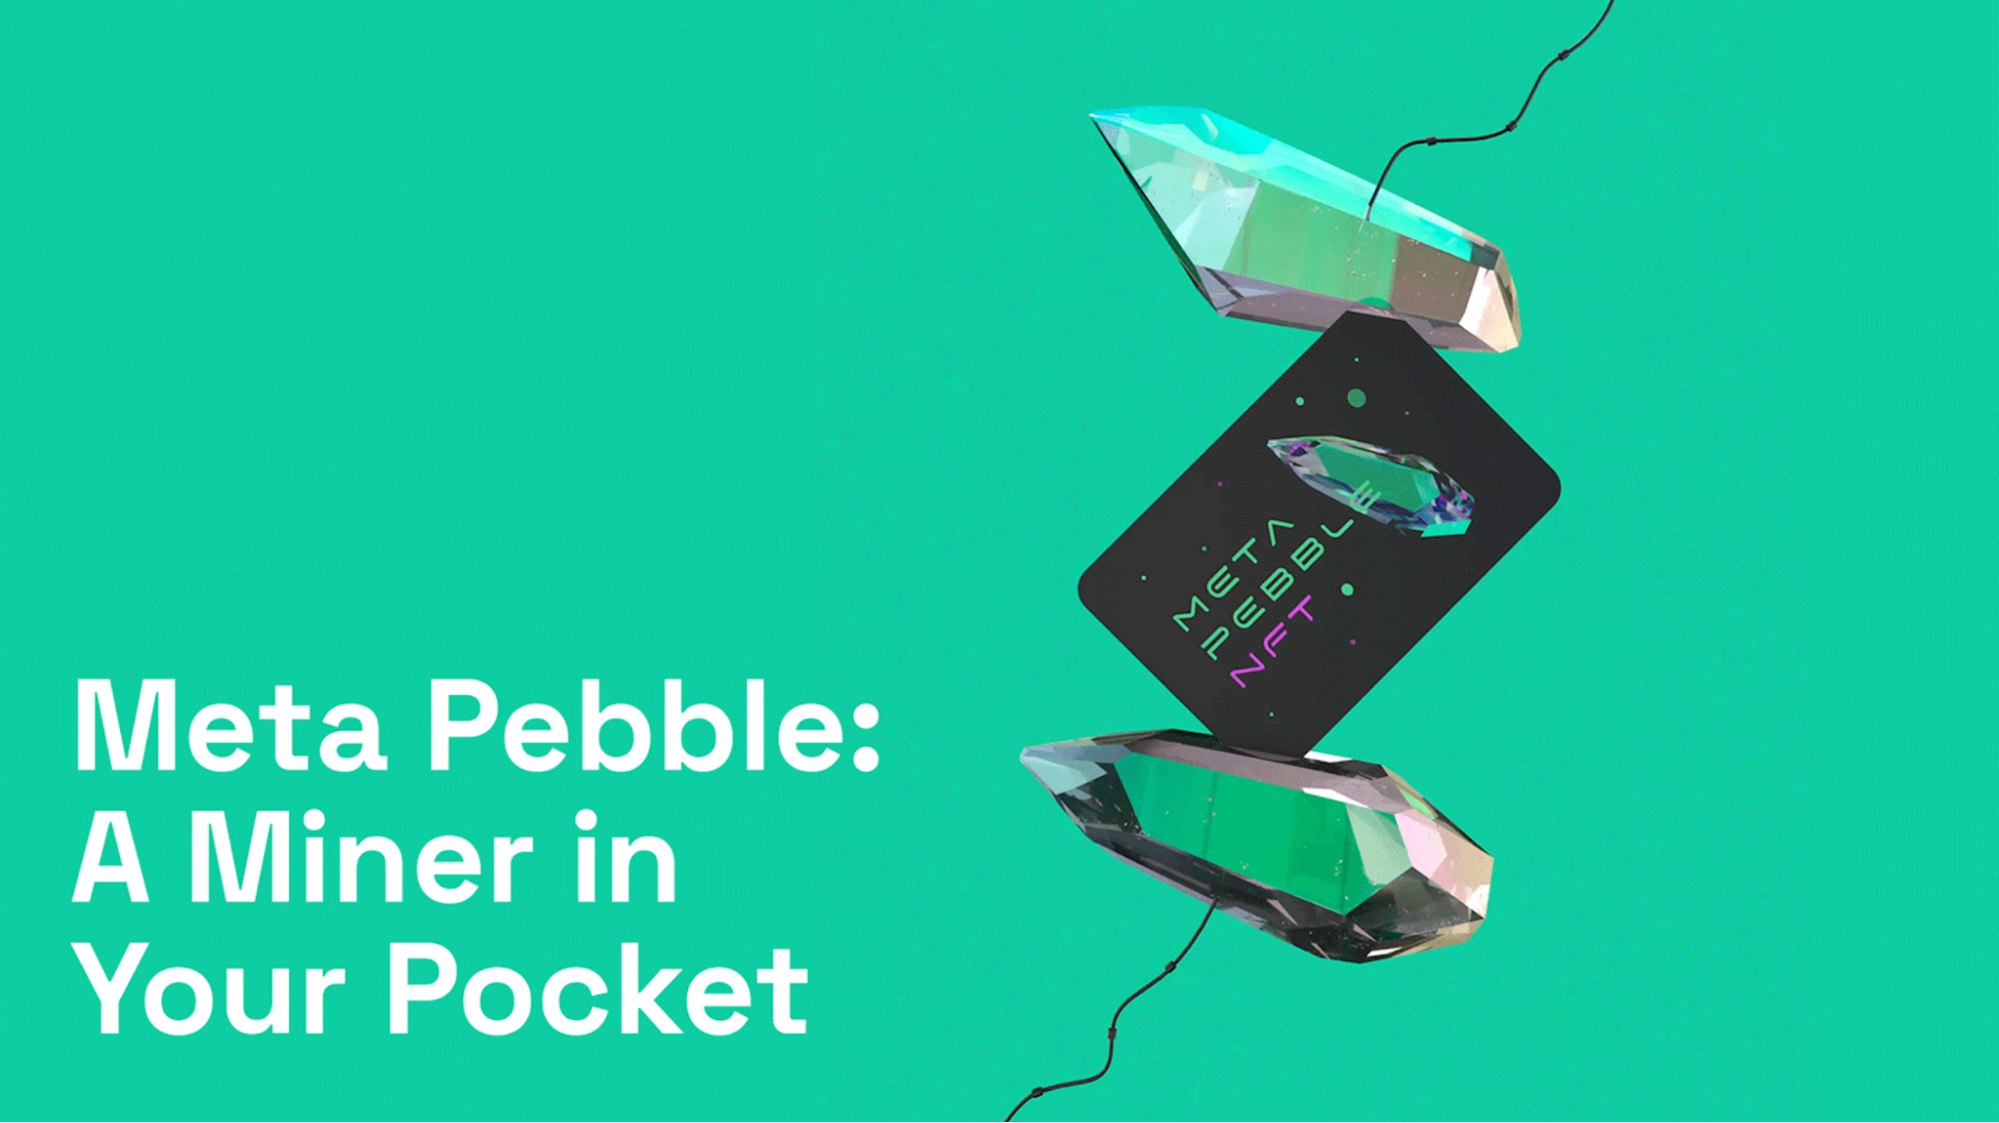 Nearly 100K users sign up to IoTeX’s Meta-Pebble within 5 days. But what is it?